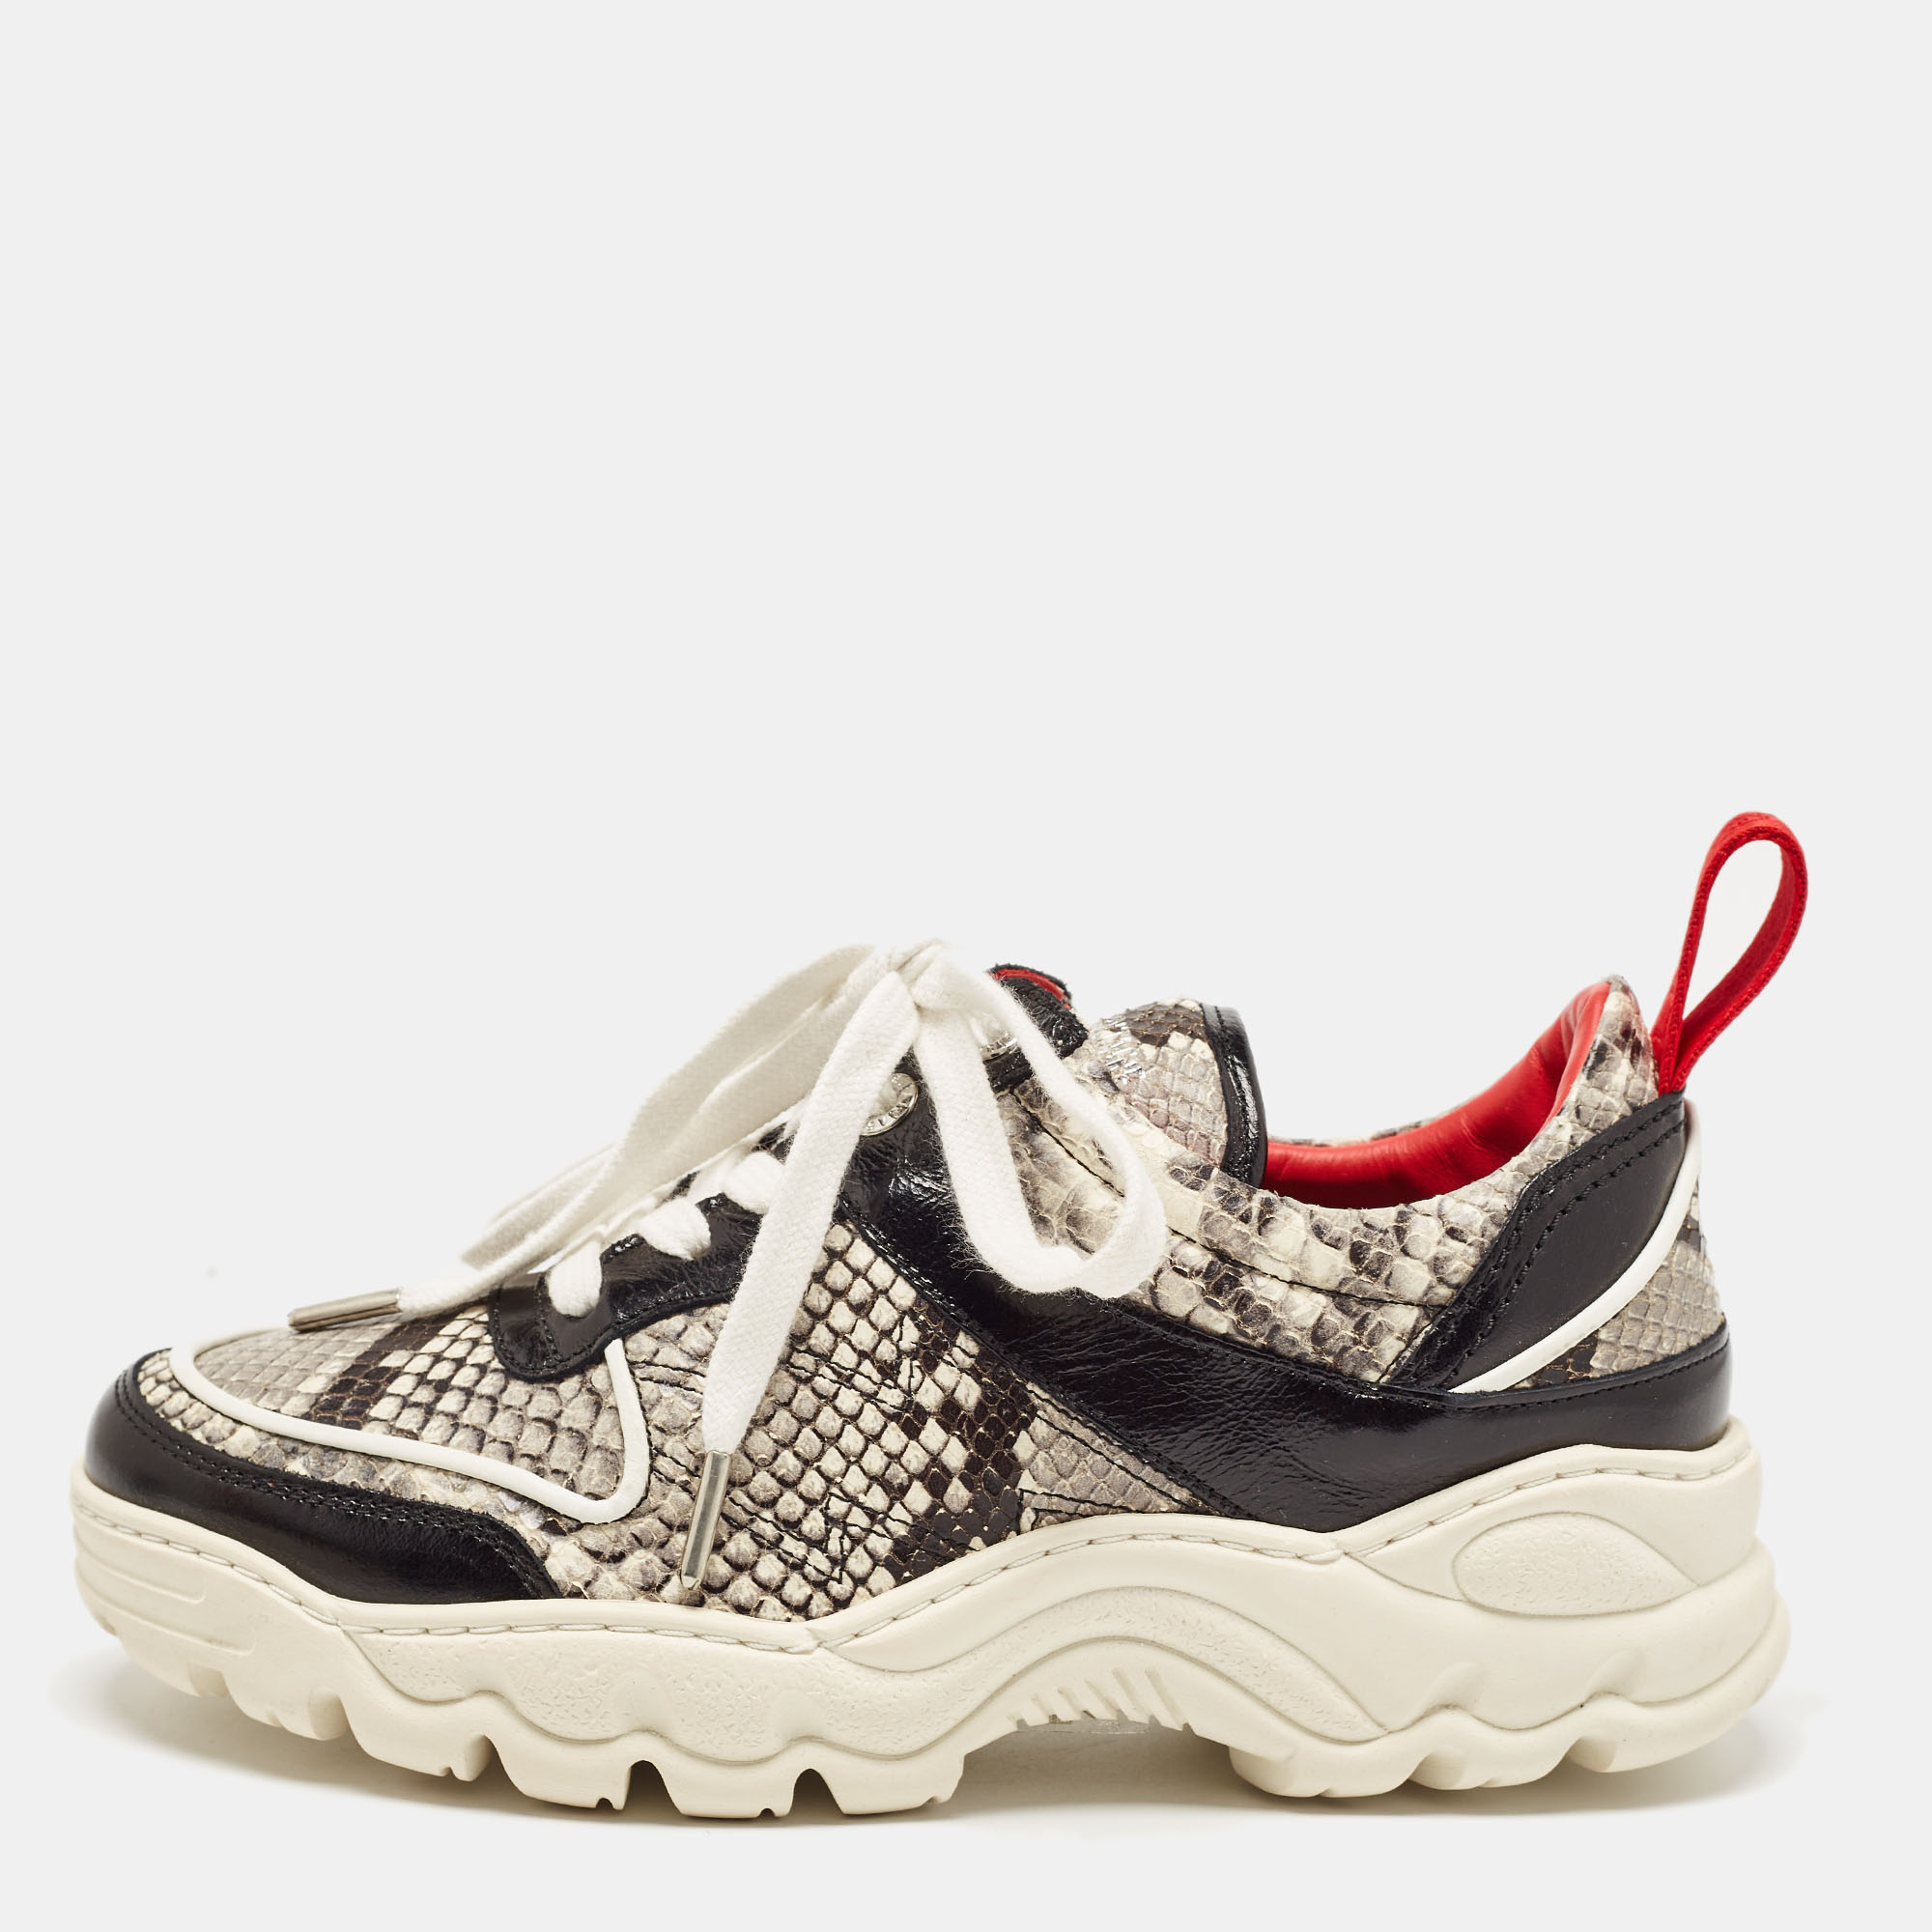 Zadig & voltaire zadig and voltaire black/white python embossed leather blaze sneakers size 38